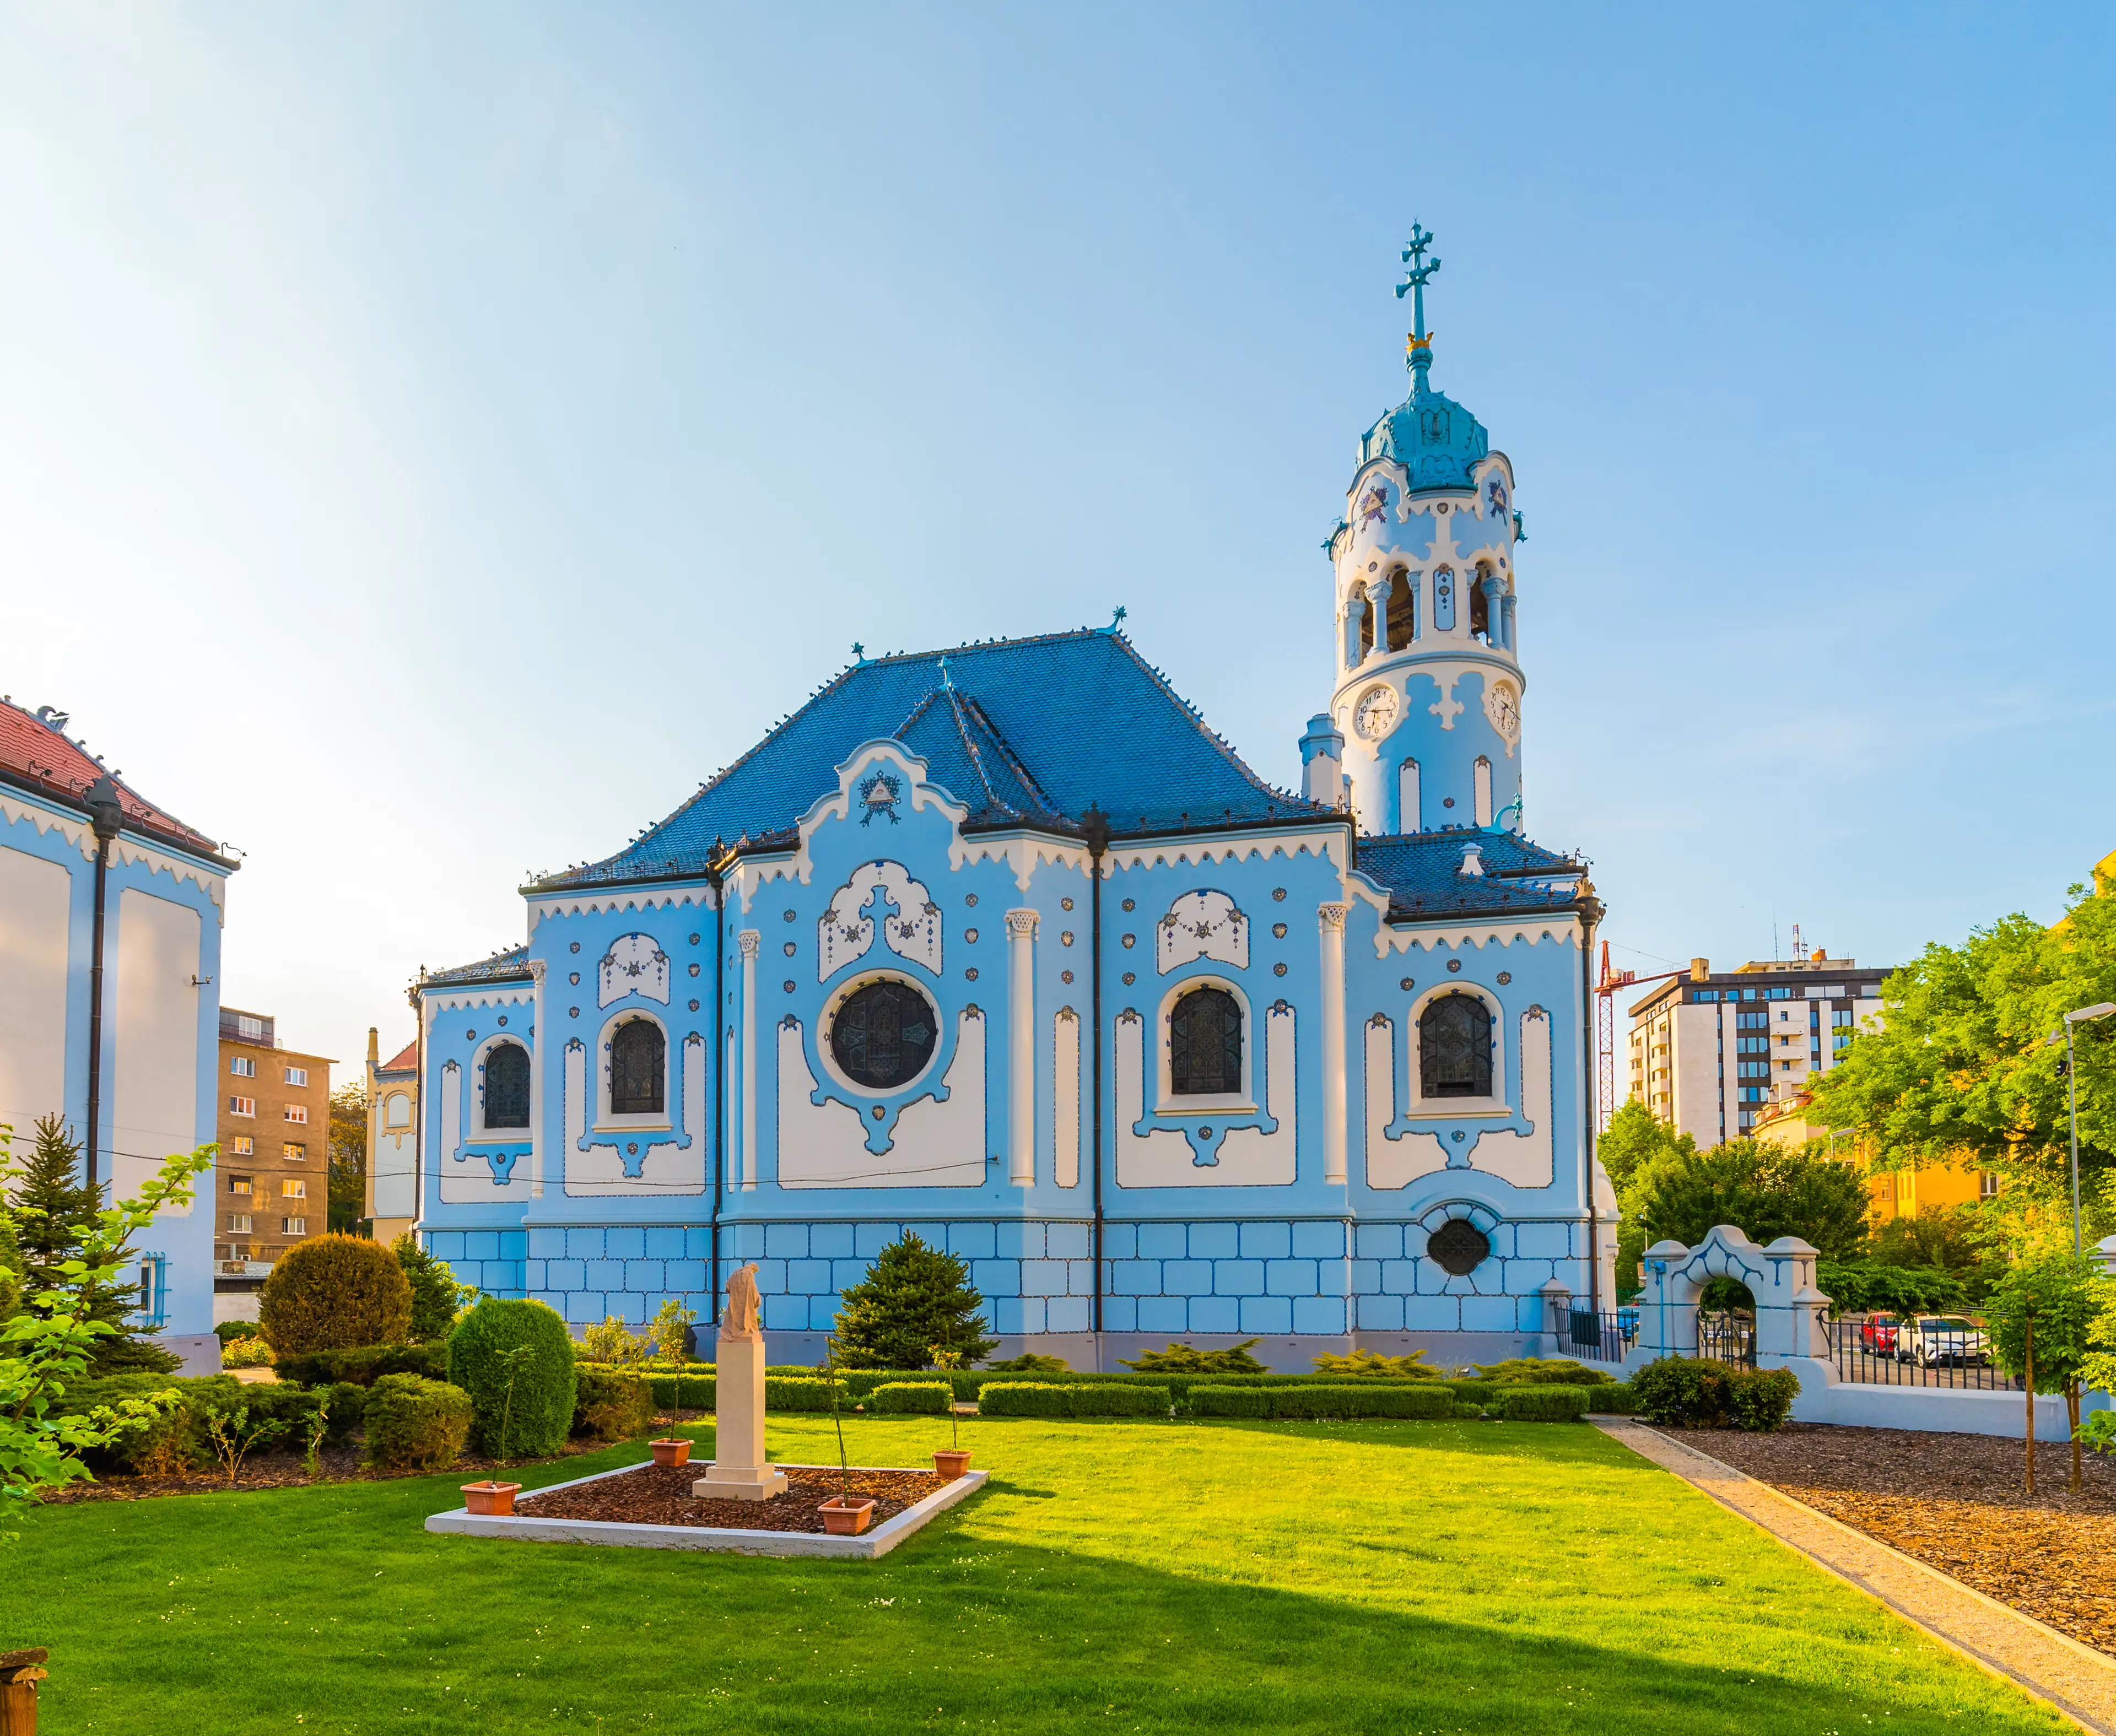 2-Day Complete Itinerary Guide to Bratislava, Slovakia